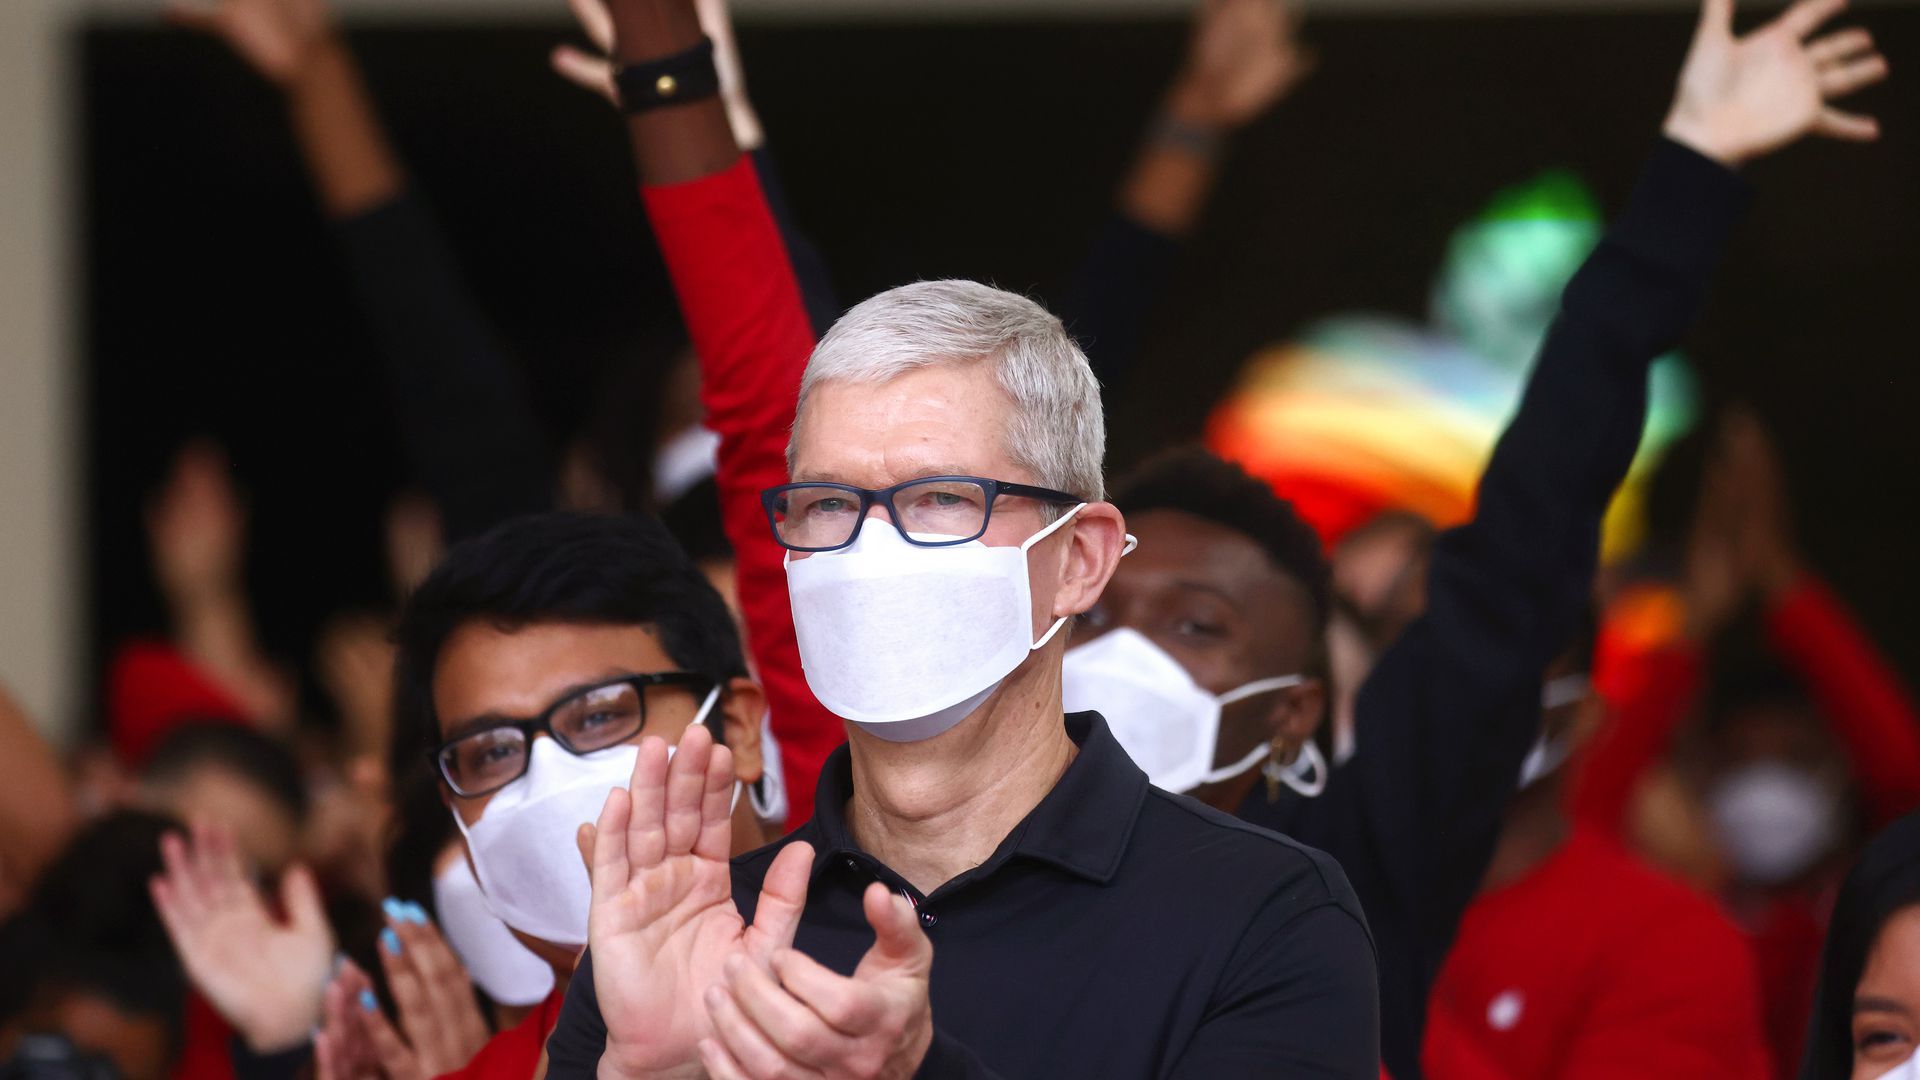 Apple CEO Tim Cook on Nov. 19, 2021, in Los Angeles. Photo: Mario Tama/Getty Images